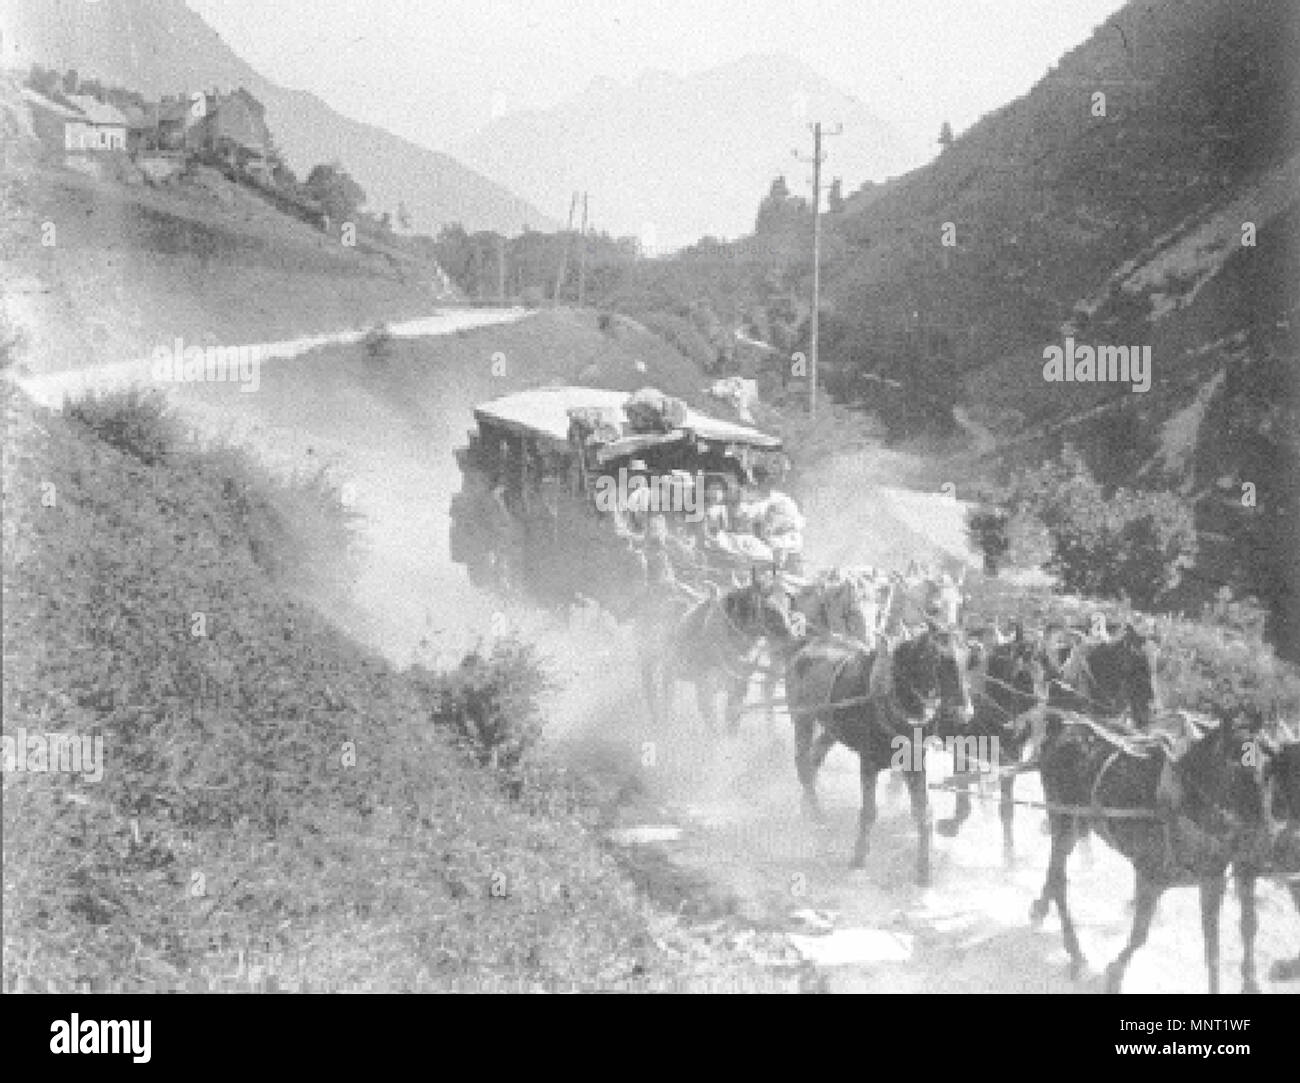 A Stagecoach. Engins’ road. Stagecoach downhill pulled by eight horses in the dust. Travellers have sat next the coach. There are luggage on the roof. The path winds through a mountainous landscape. On the bottom sides are electric poles. Some houses are located on a mountainside. 1906. Unknown 963 Patache. Route d'Engins Stock Photo